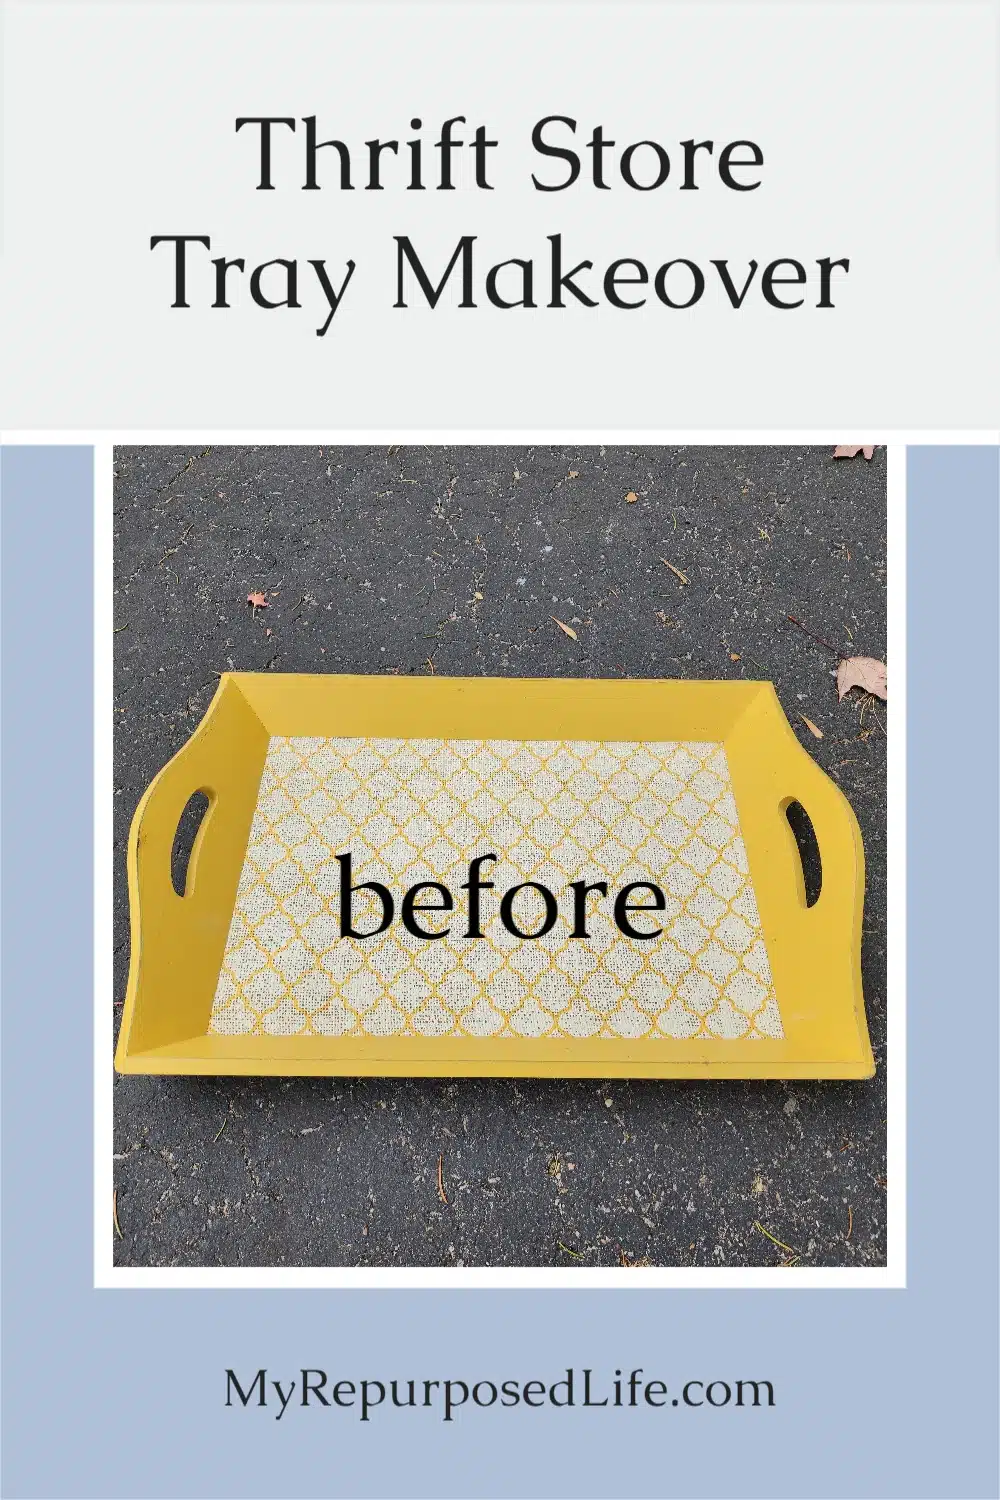 Thrift stores have tons of cheap trays. How about a tray makeover with spray paint and wallpaper? Lots of tips and tricks to make this an easy project. #MyRepurposedLife #upcycle #thrift #tray via @repurposedlife